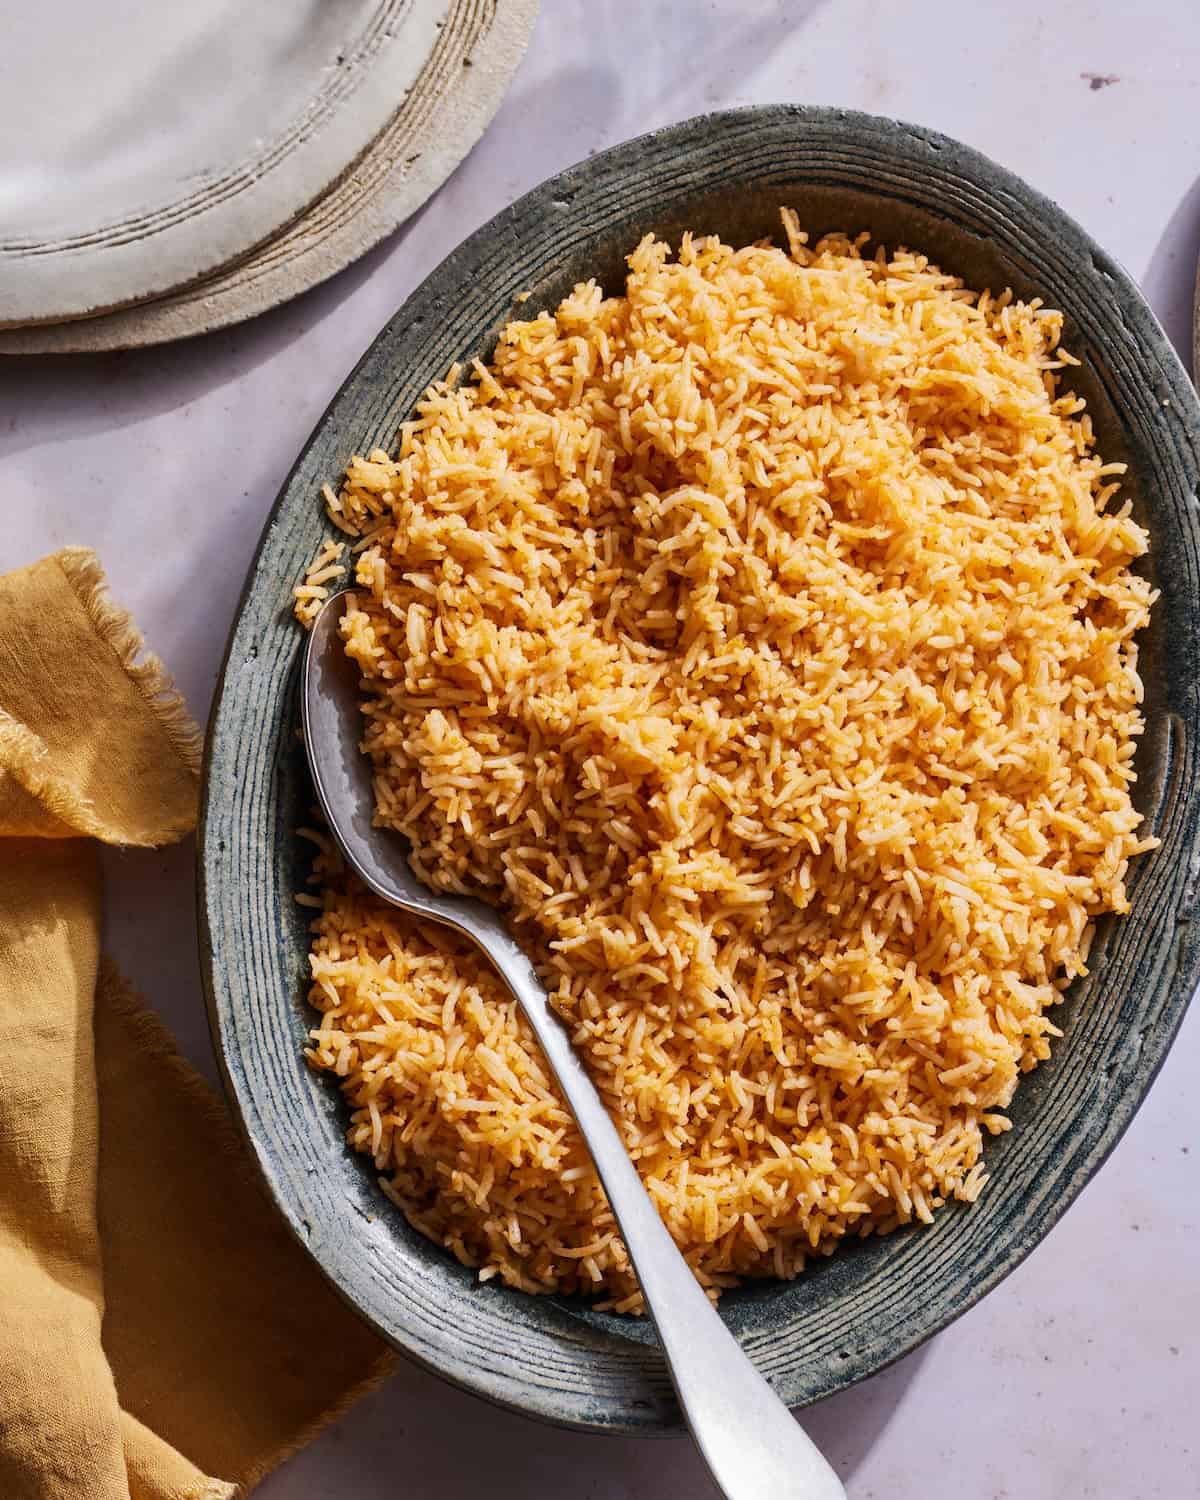 Spanish Rice in a serving bowl with a serving spoon.